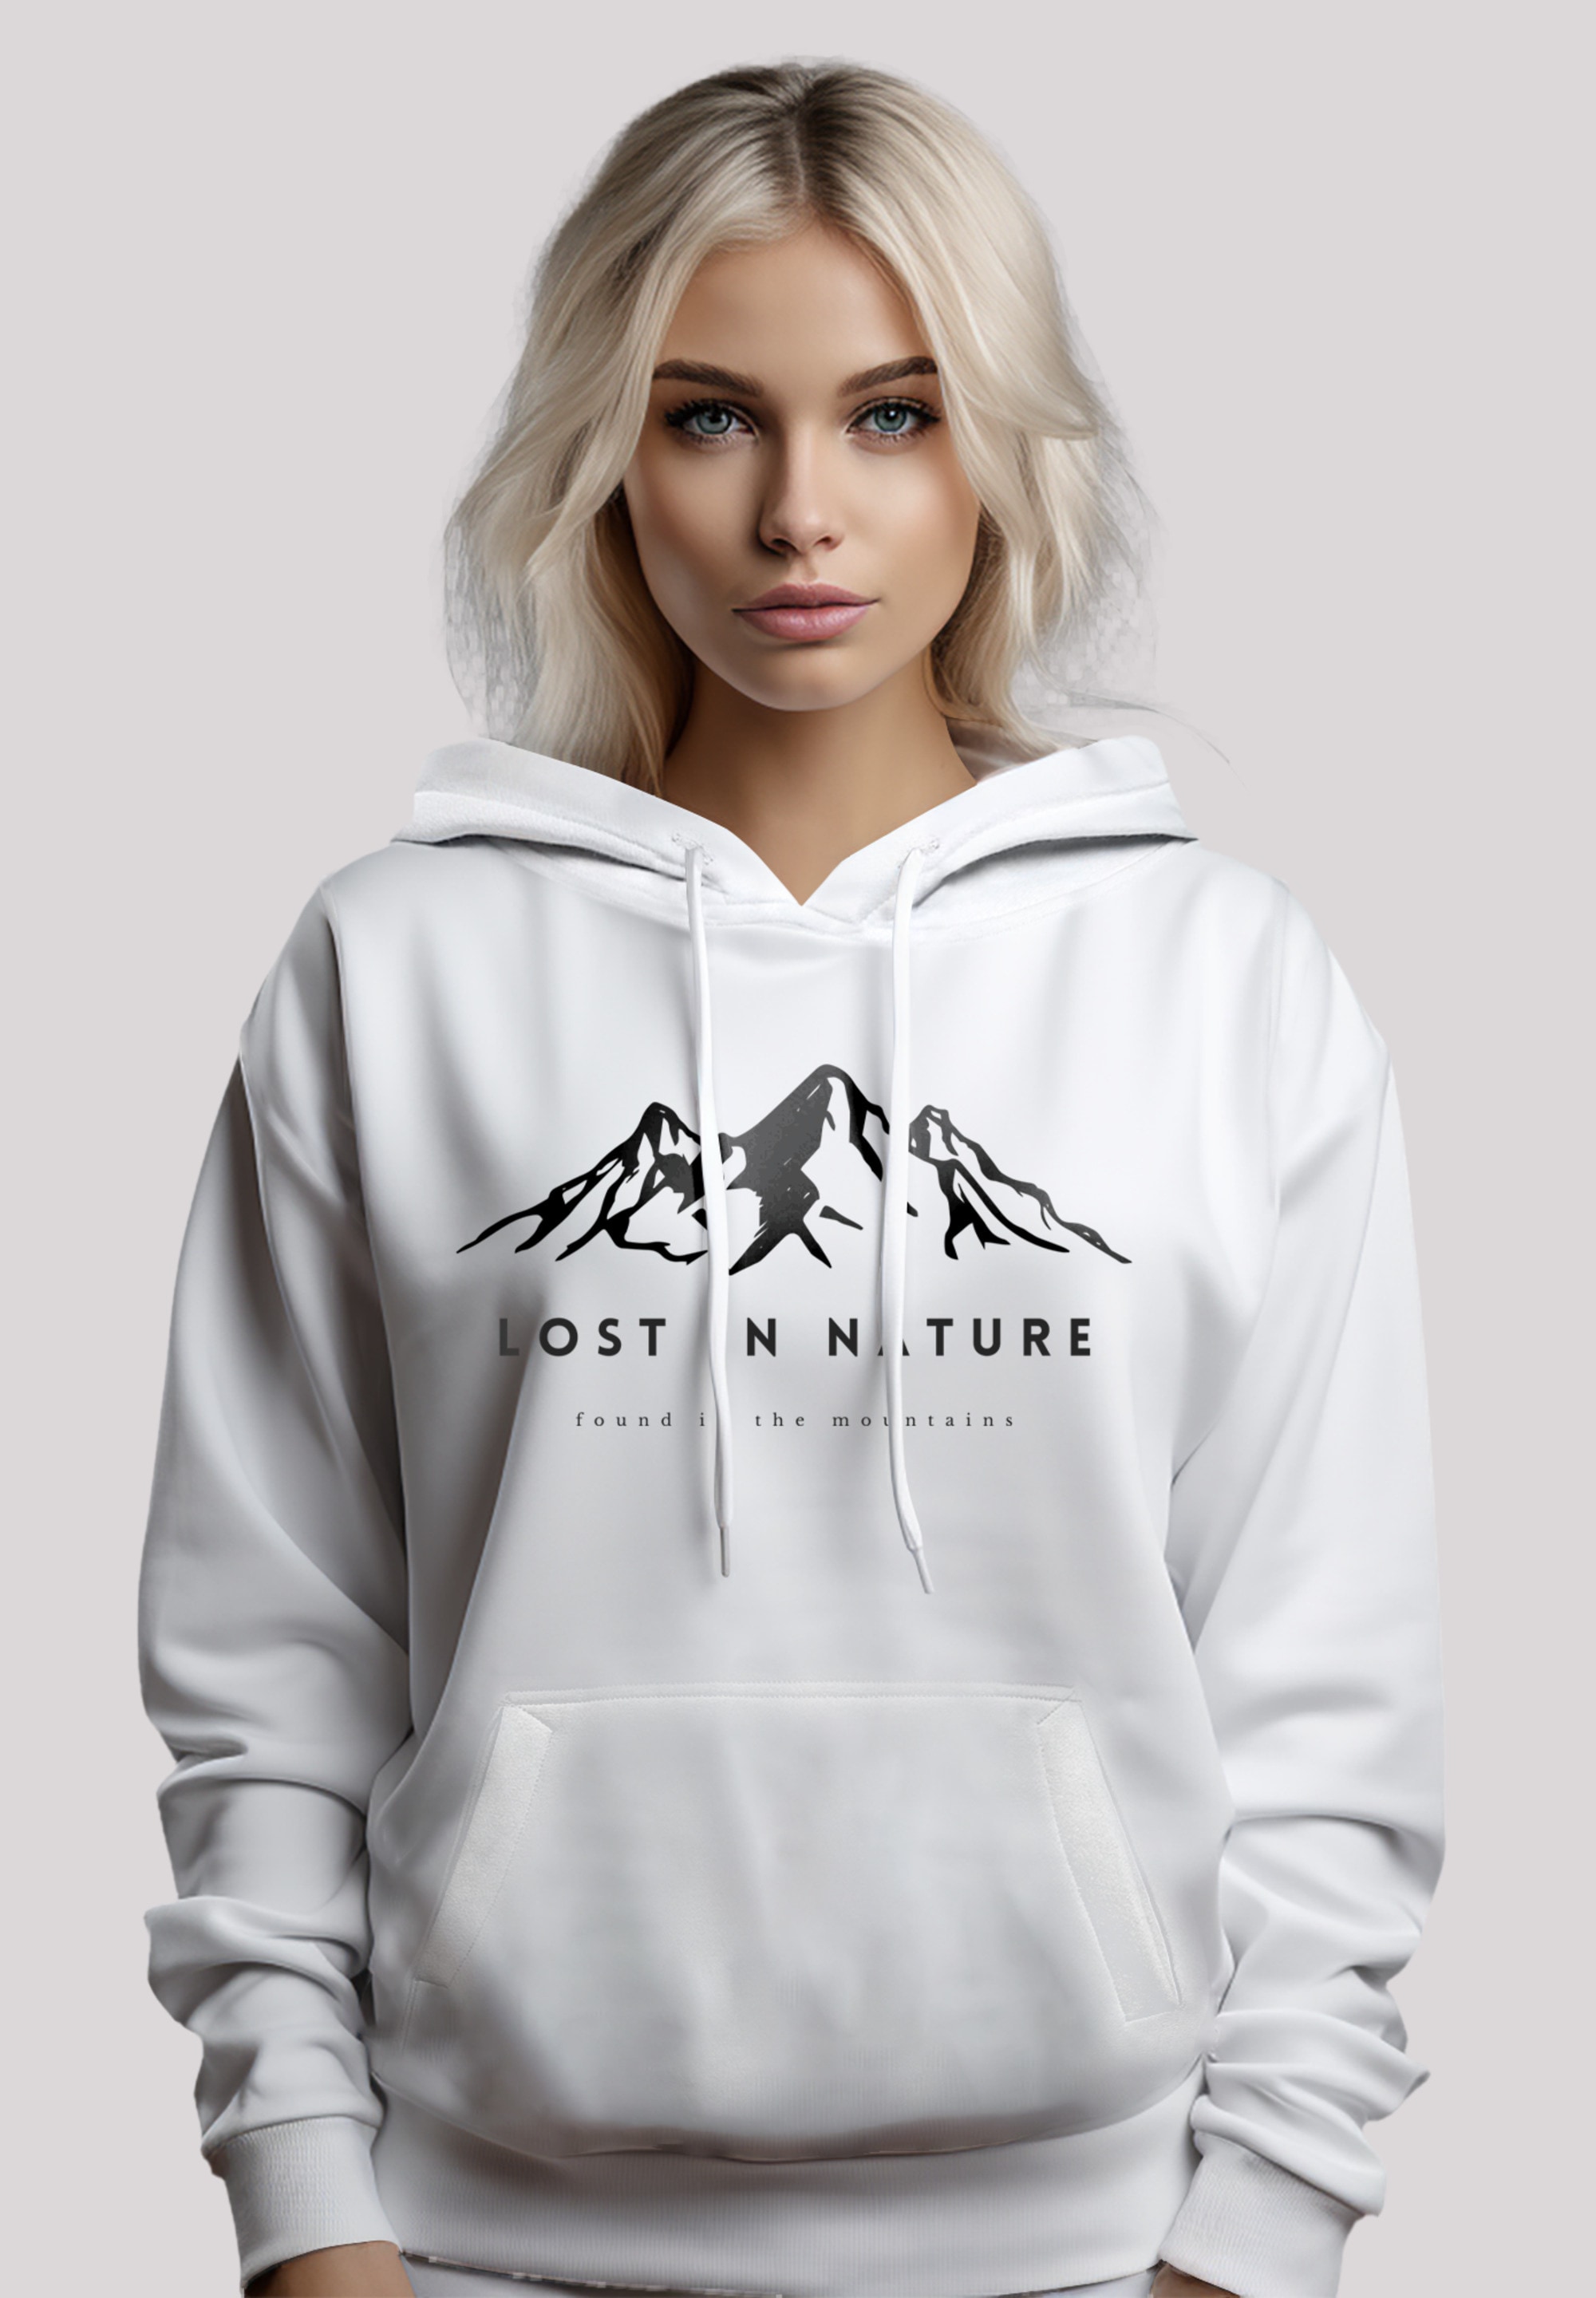 F4NT4STIC Kapuzenpullover »Lost in nature«, Hoodie, Warm, Bequem